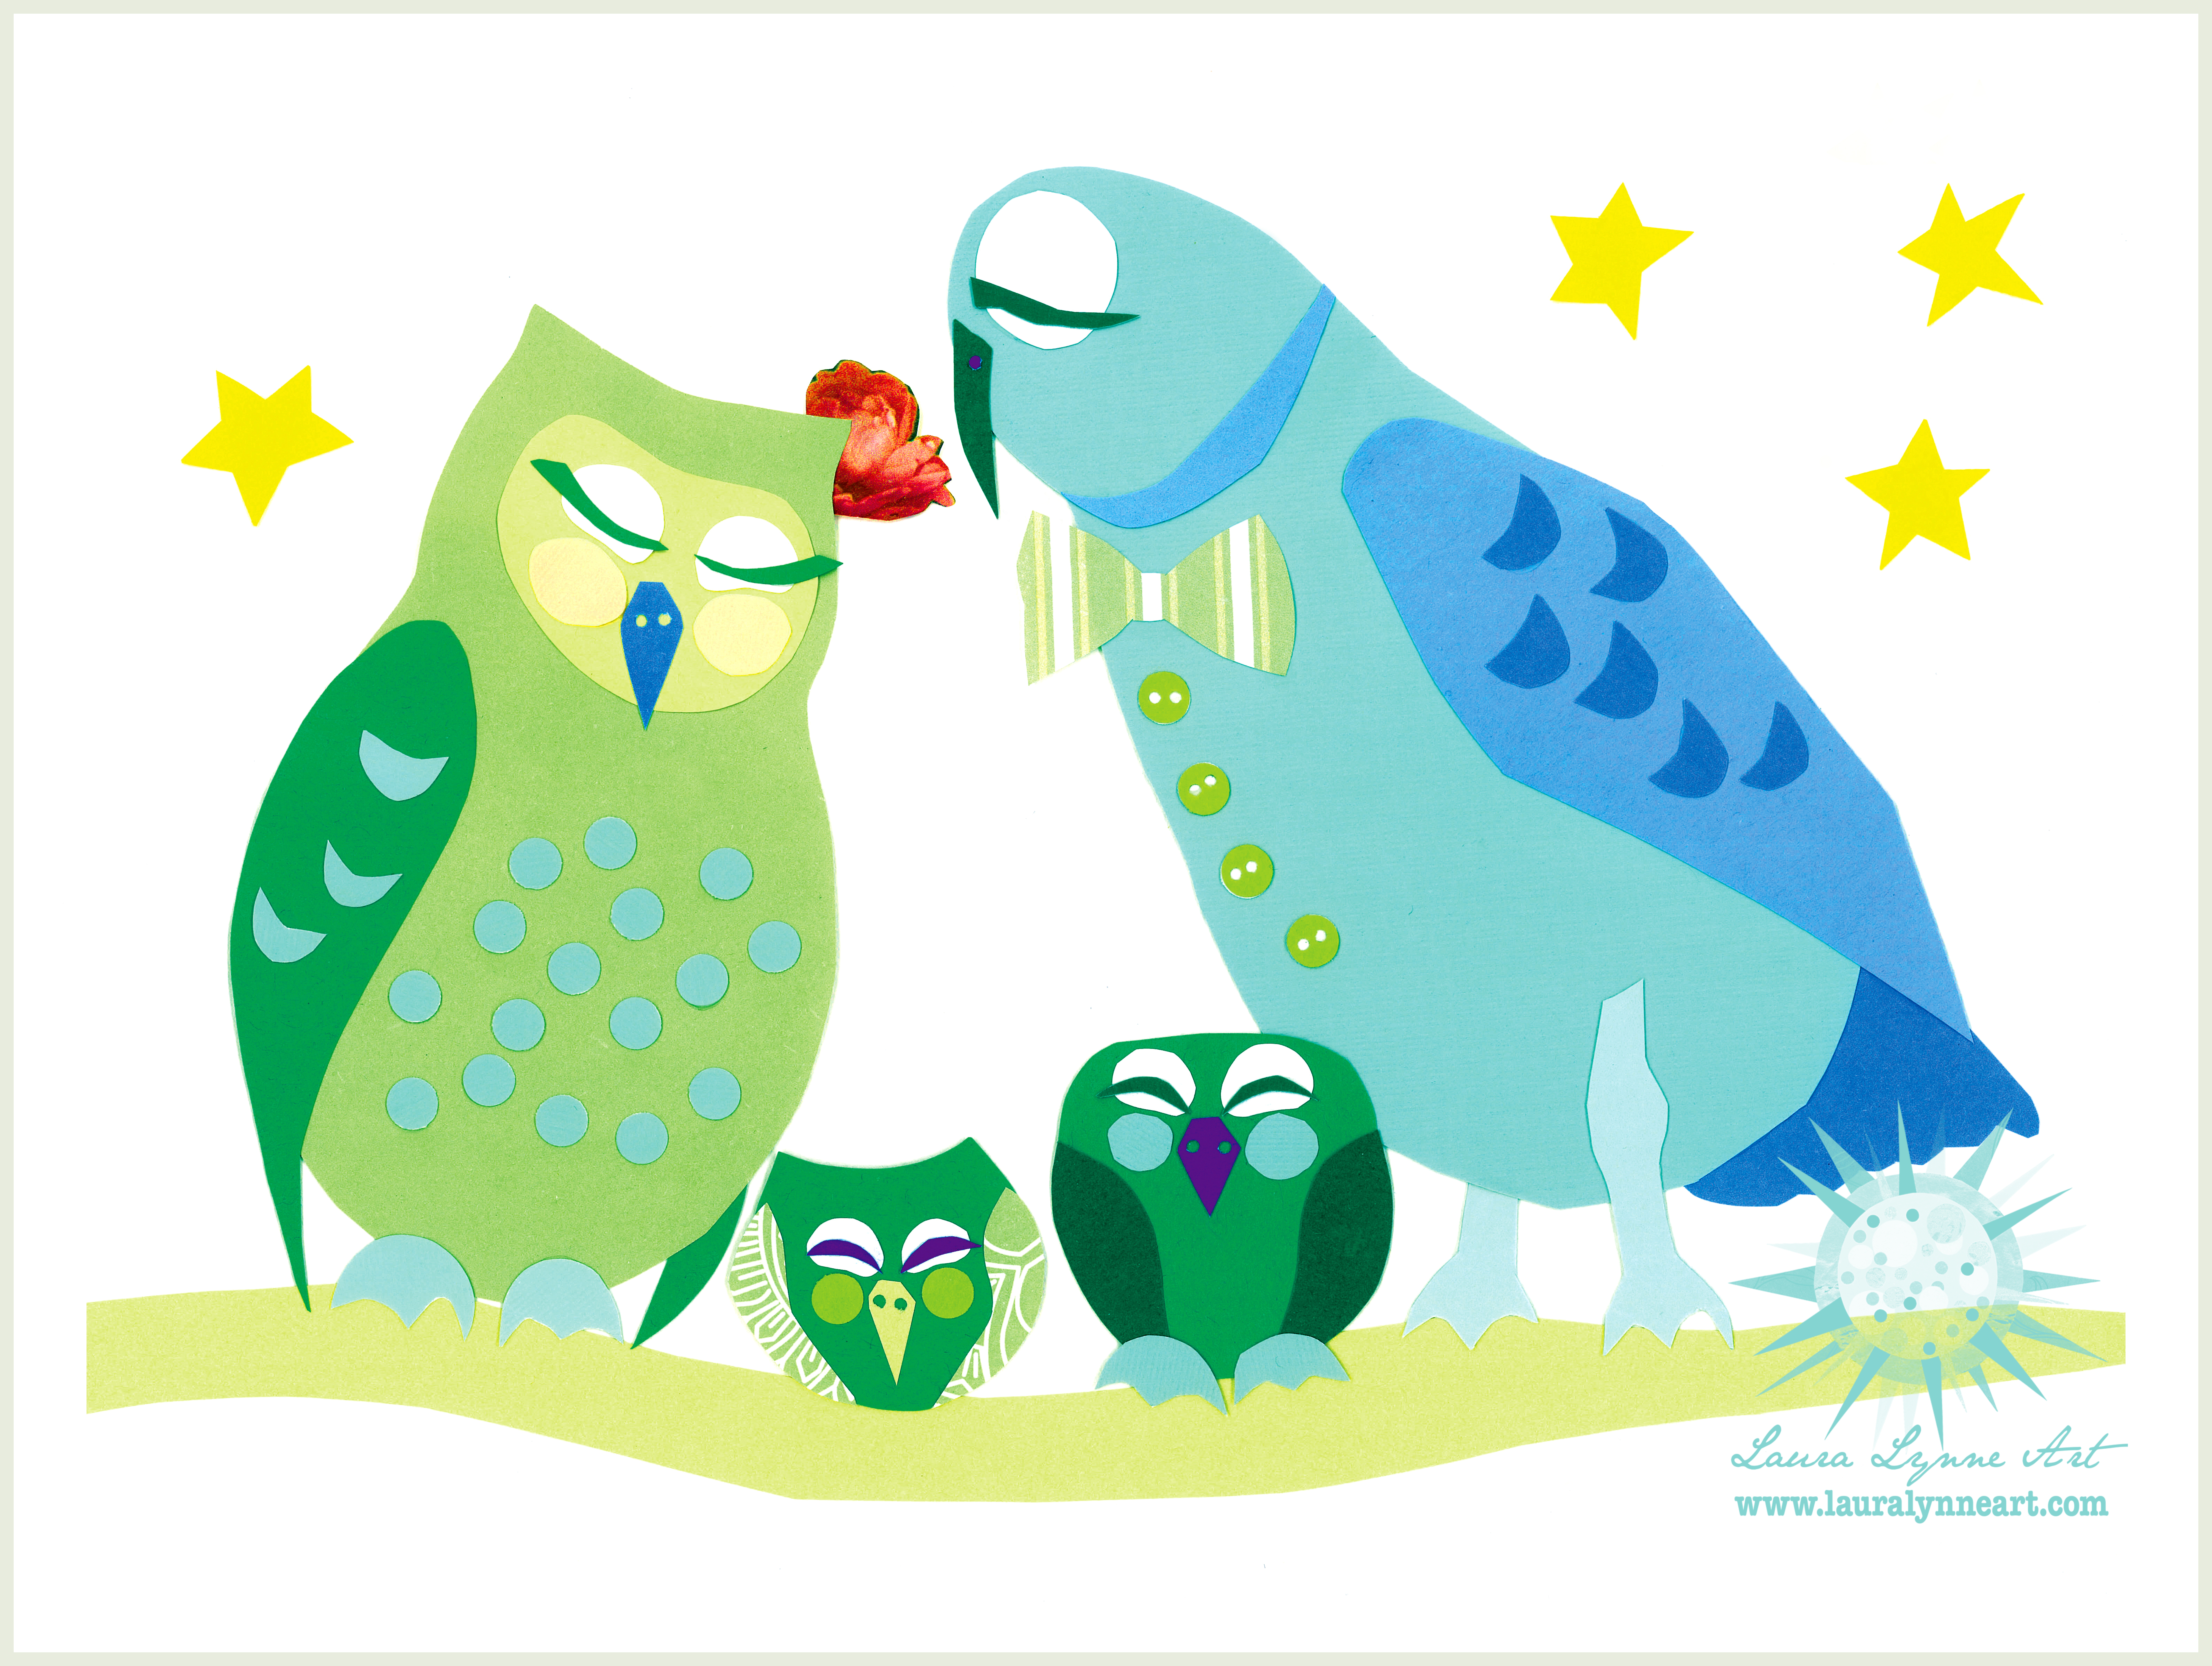 illustration of sleeping owl family on a branch with stars.jpg